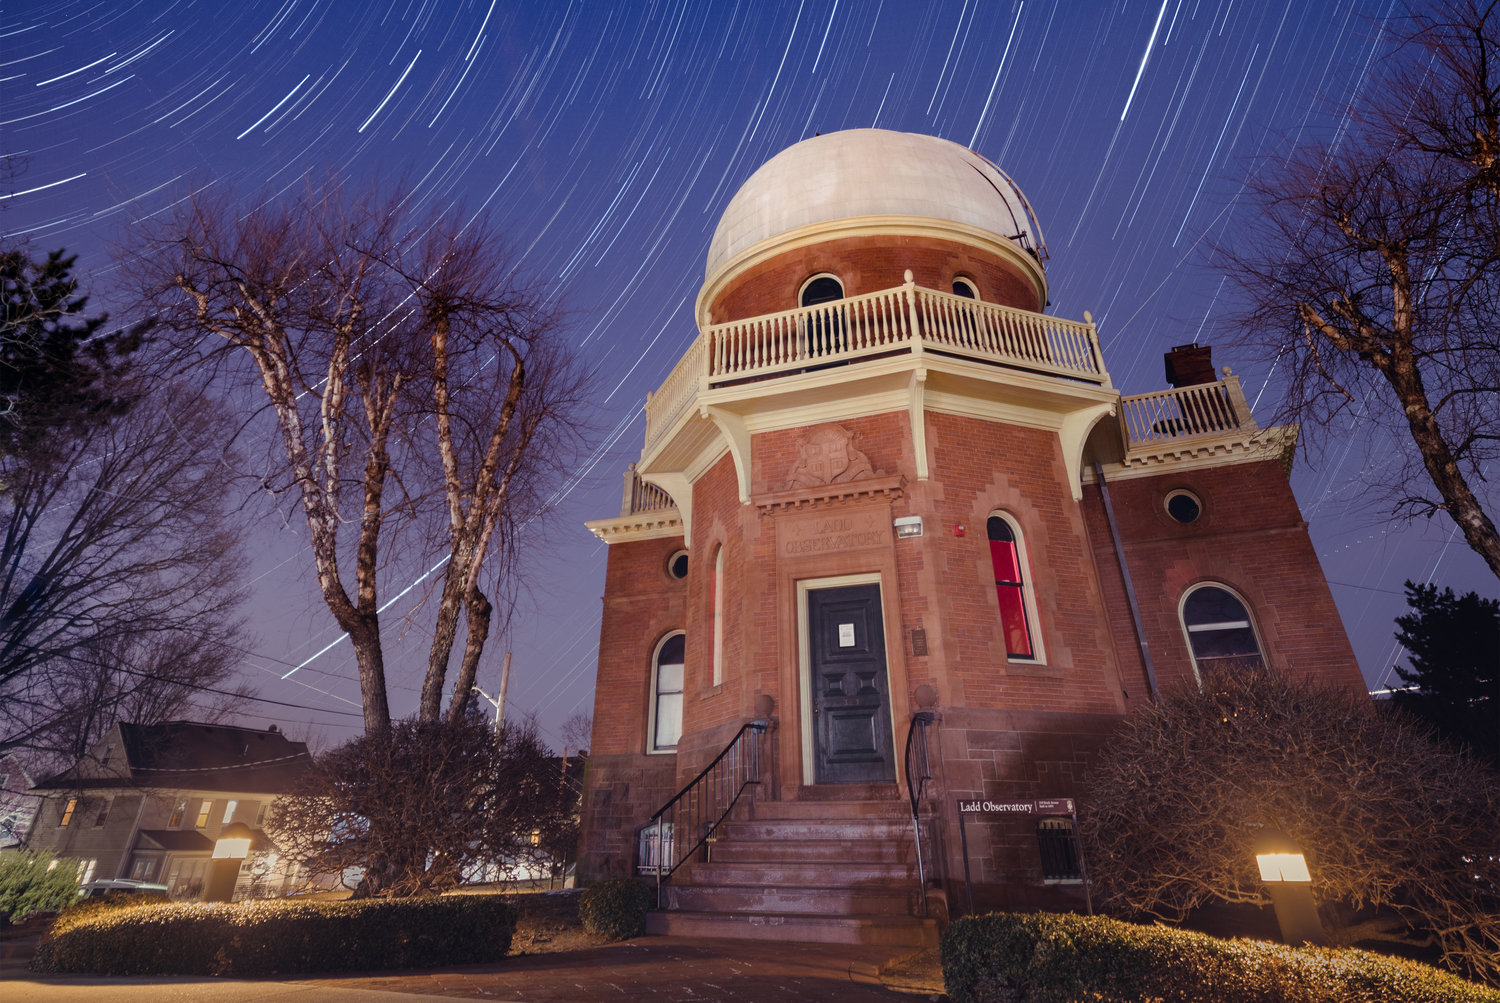 Observe star clusters and more from Doyle Avenue